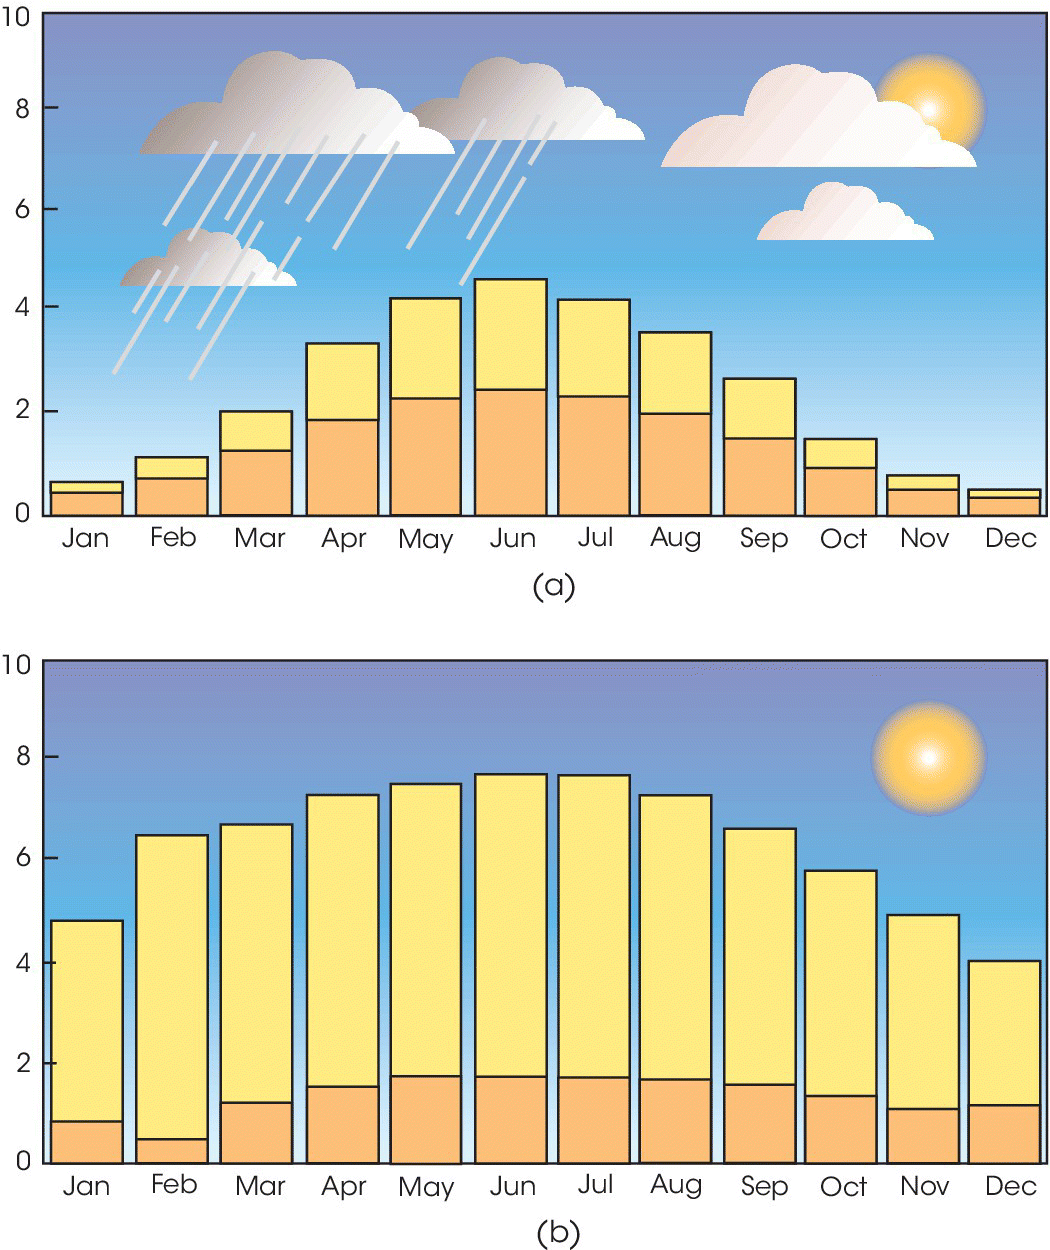 2 Bar graphs depicting average daily solar radiation in kWh/m2 on a horizontal surface in London or Amsterdam (a) and in Sahara Desert (b), with each bar having 2 portions representing direct and diffuse components.